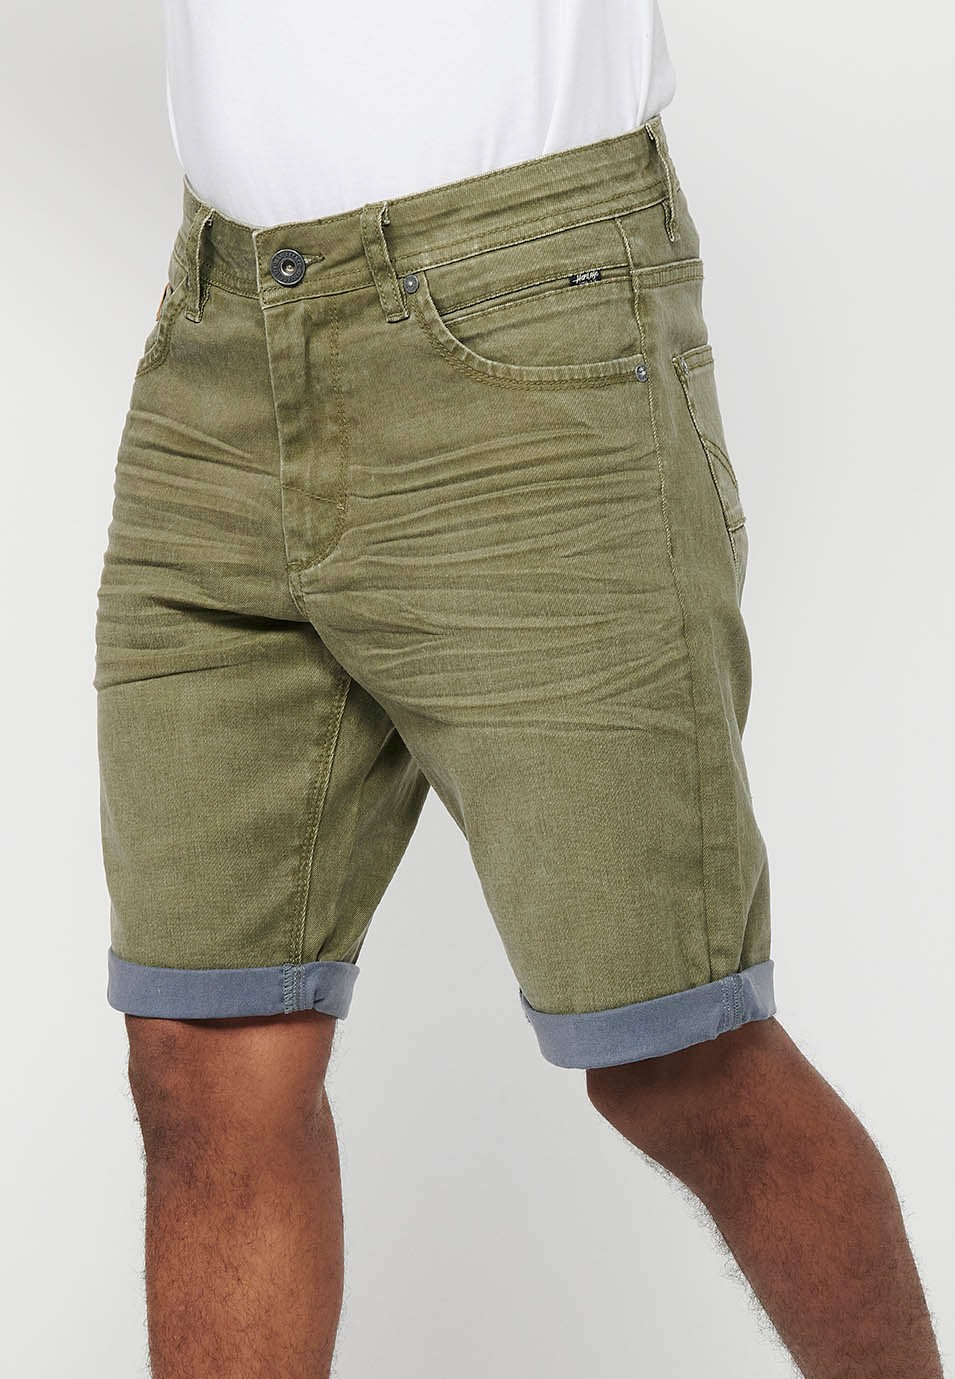 Denim Bermuda shorts with turn-up finish, front closure with zipper and button with five pockets, one pocket pocket, Olive Color for Men 3